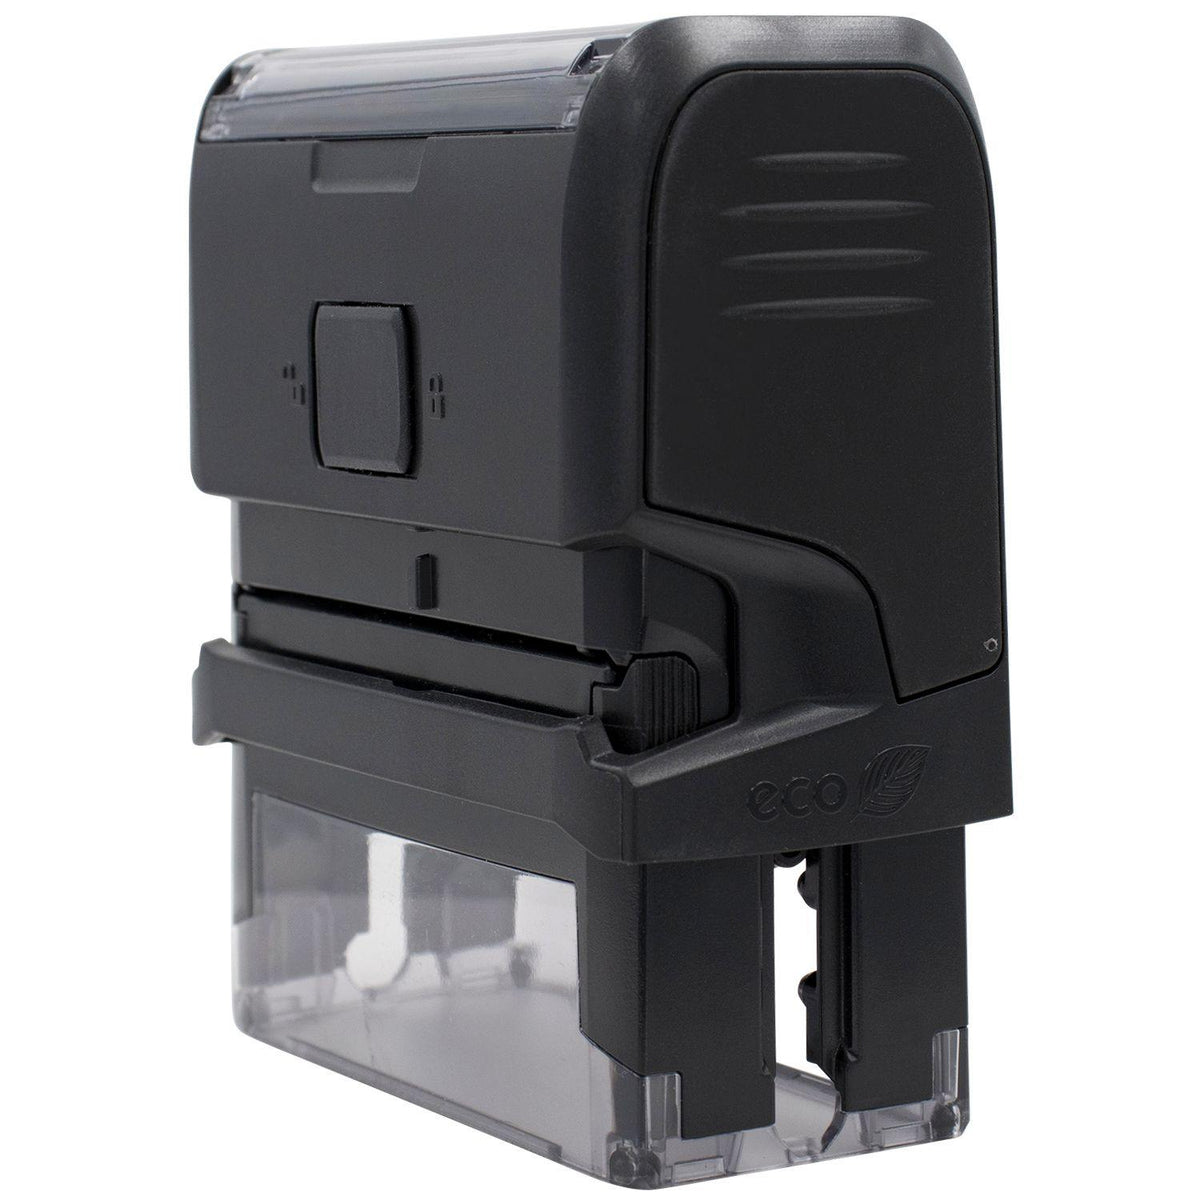 Self Inking Installment Loan Stamp - Engineer Seal Stamps - Brand_Trodat, Impression Size_Small, Stamp Type_Self-Inking Stamp, Type of Use_Finance